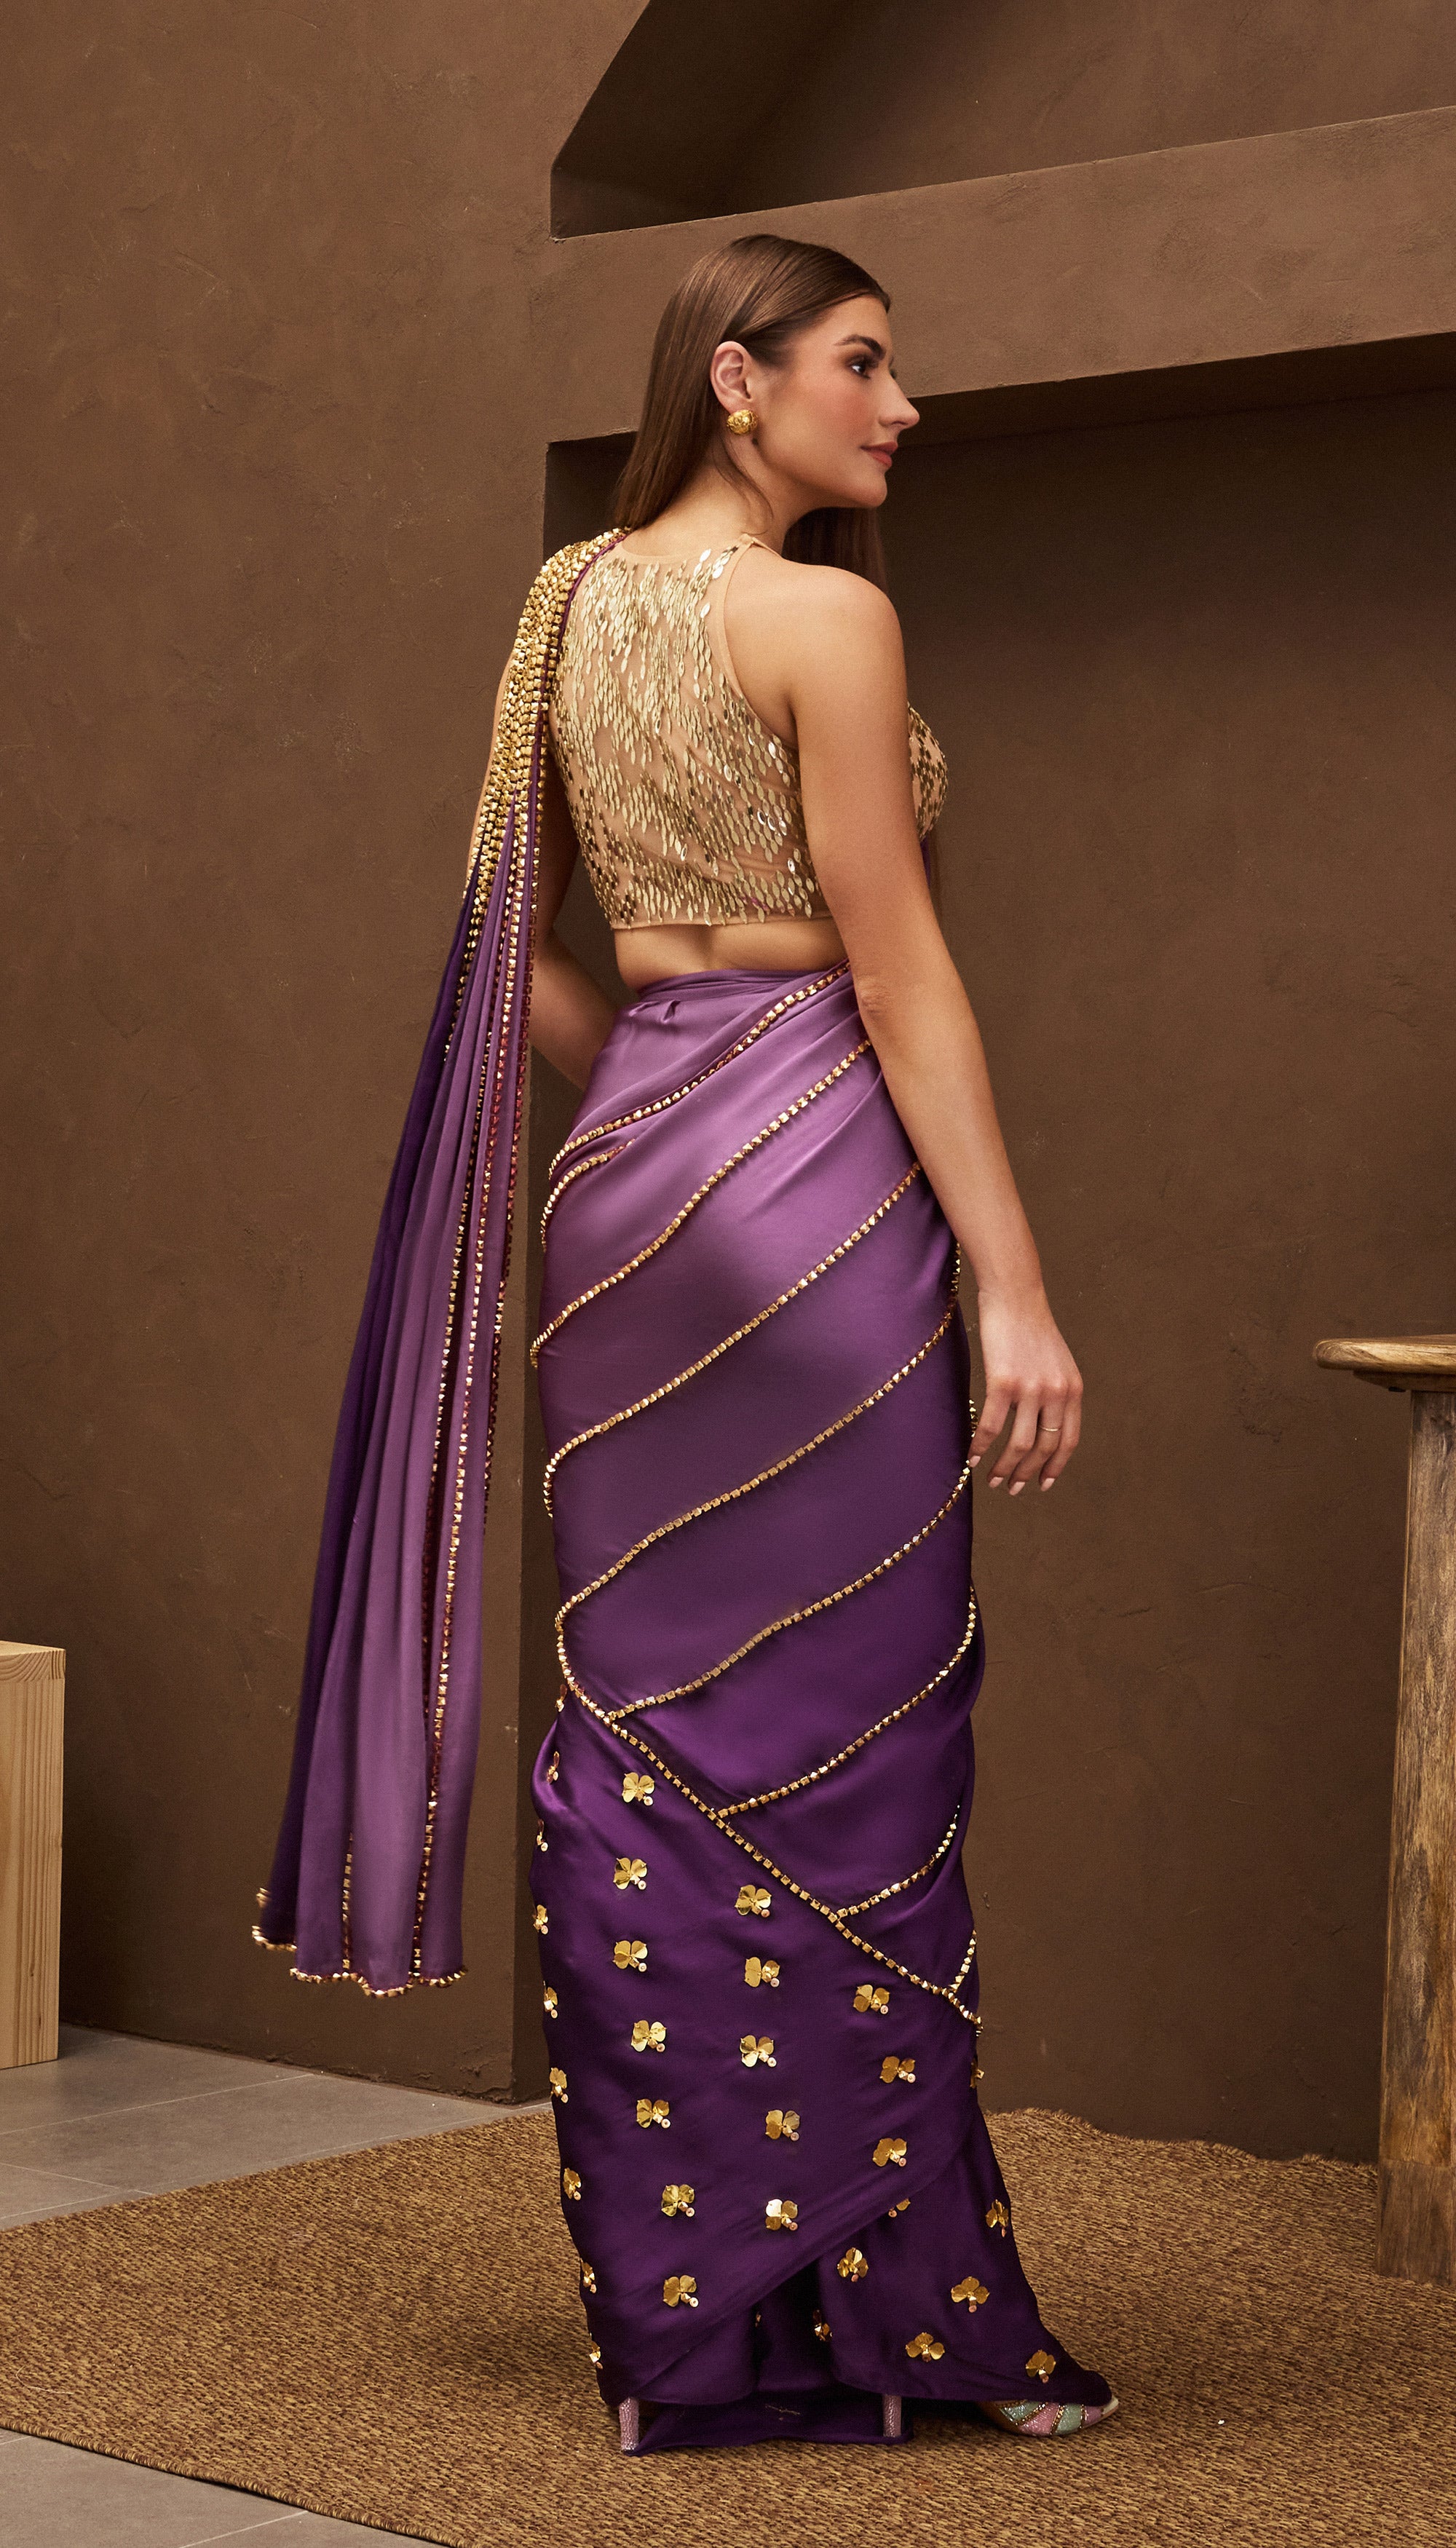 Purple Pre-Drape Saree💜 Stunning purple dress with shiny decorations on  the top and a stylish, uneven shoulder design for a fancy… | Instagram